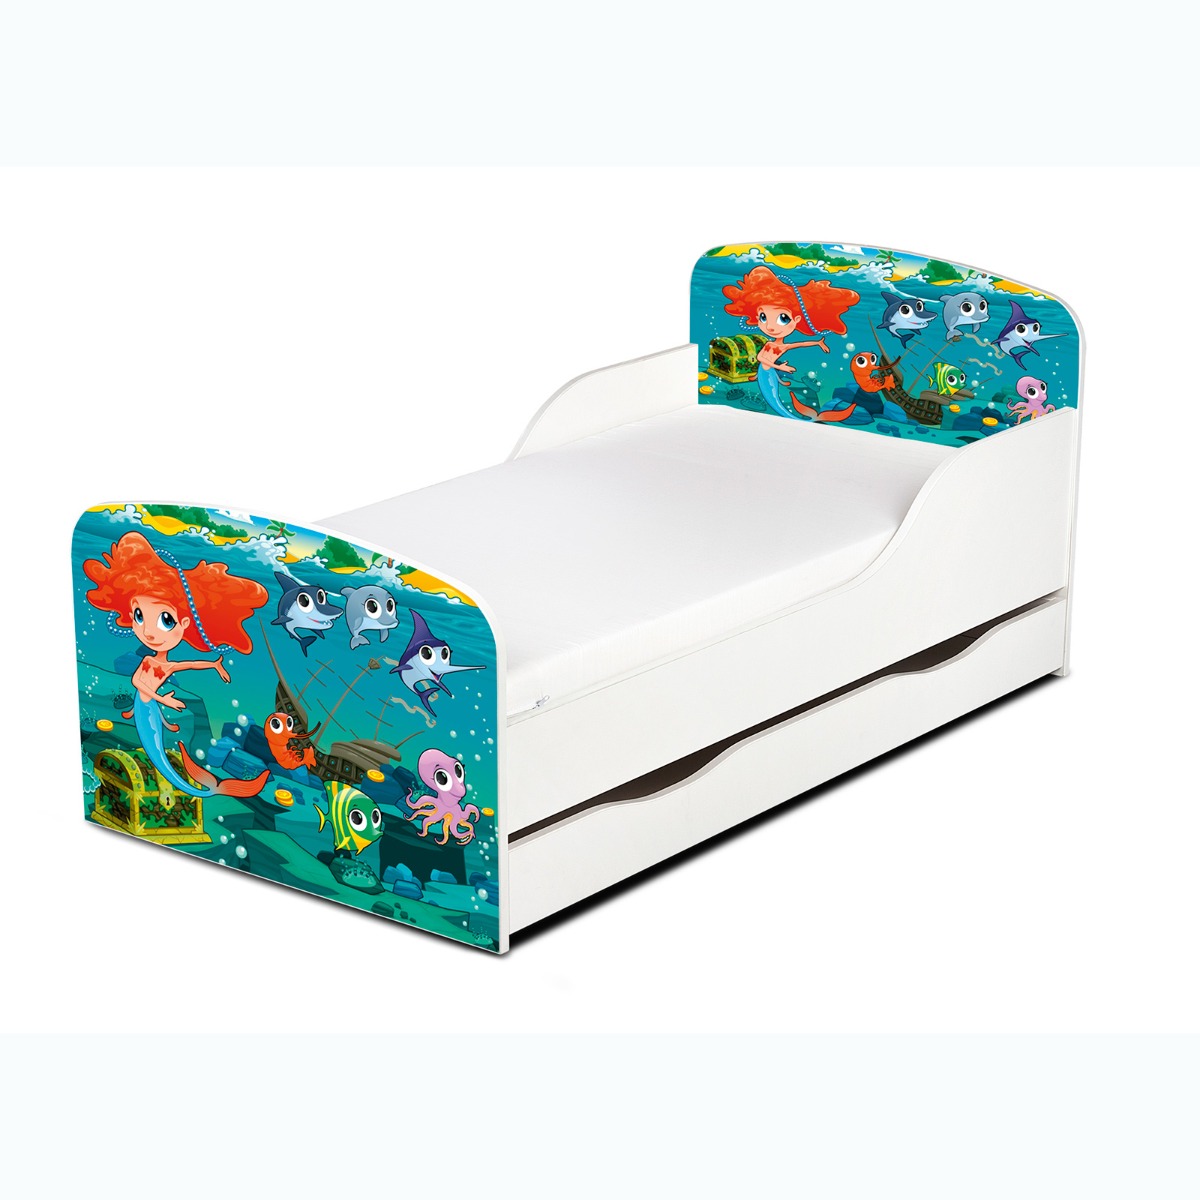 Mermaid Toddler Bed With Underbed Storage - Mattress Options Available